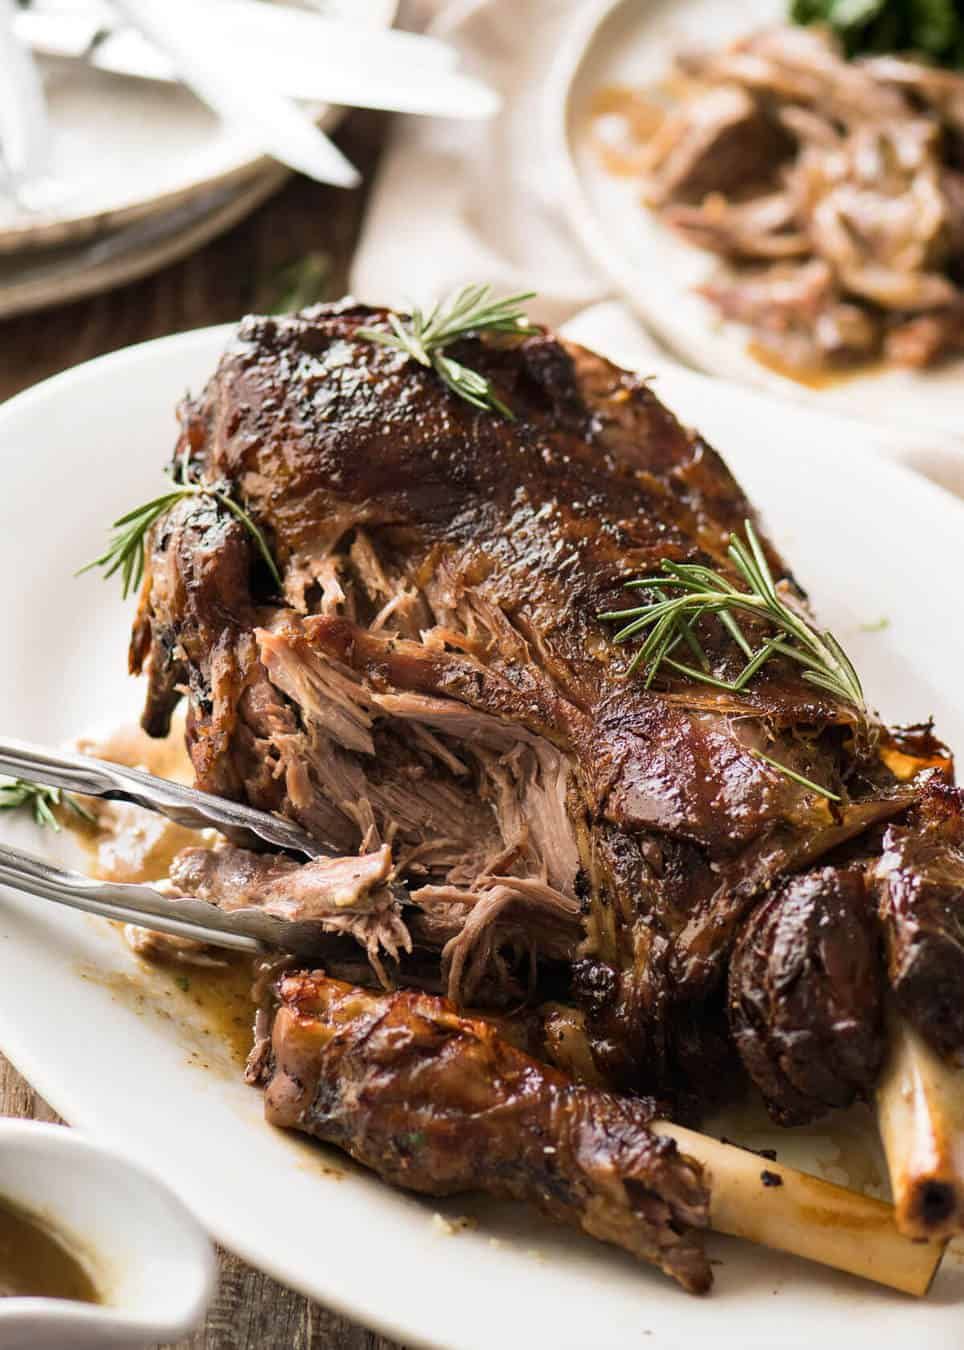 From The Oven To The Table: How To Cook Leg Of Lamb To Perfection